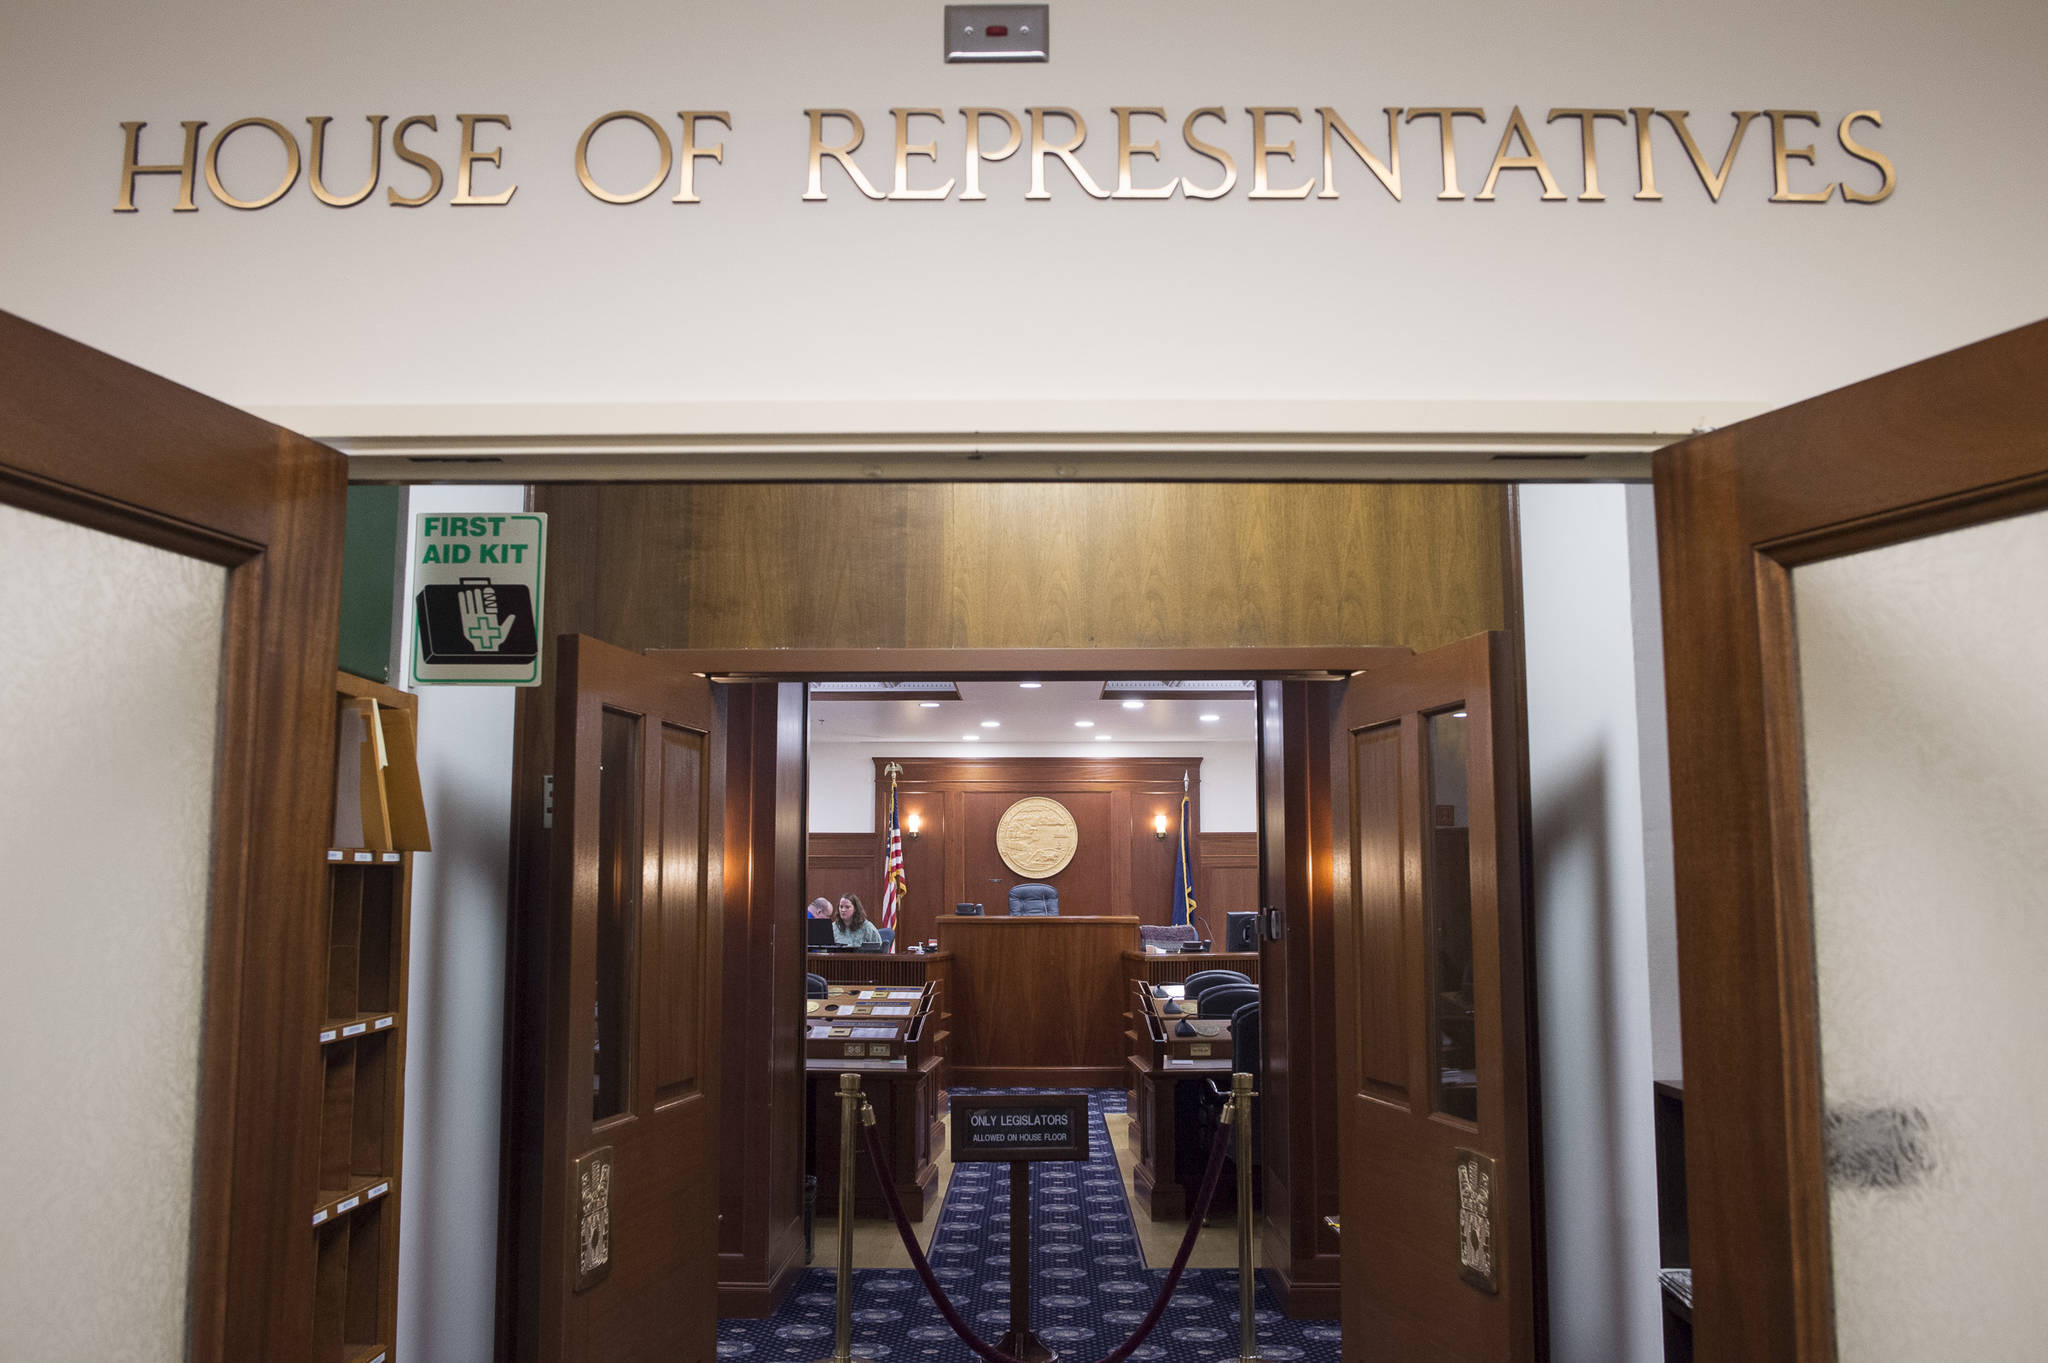 Leadership remains unsolved in the House of Representatives on Friday, Jan. 25, 2019. (Michael Penn | Juneau Empire)                                Leadership remains unsolved in the House of Representatives on Friday, Jan. 25, 2019. (Michael Penn | Juneau Empire)